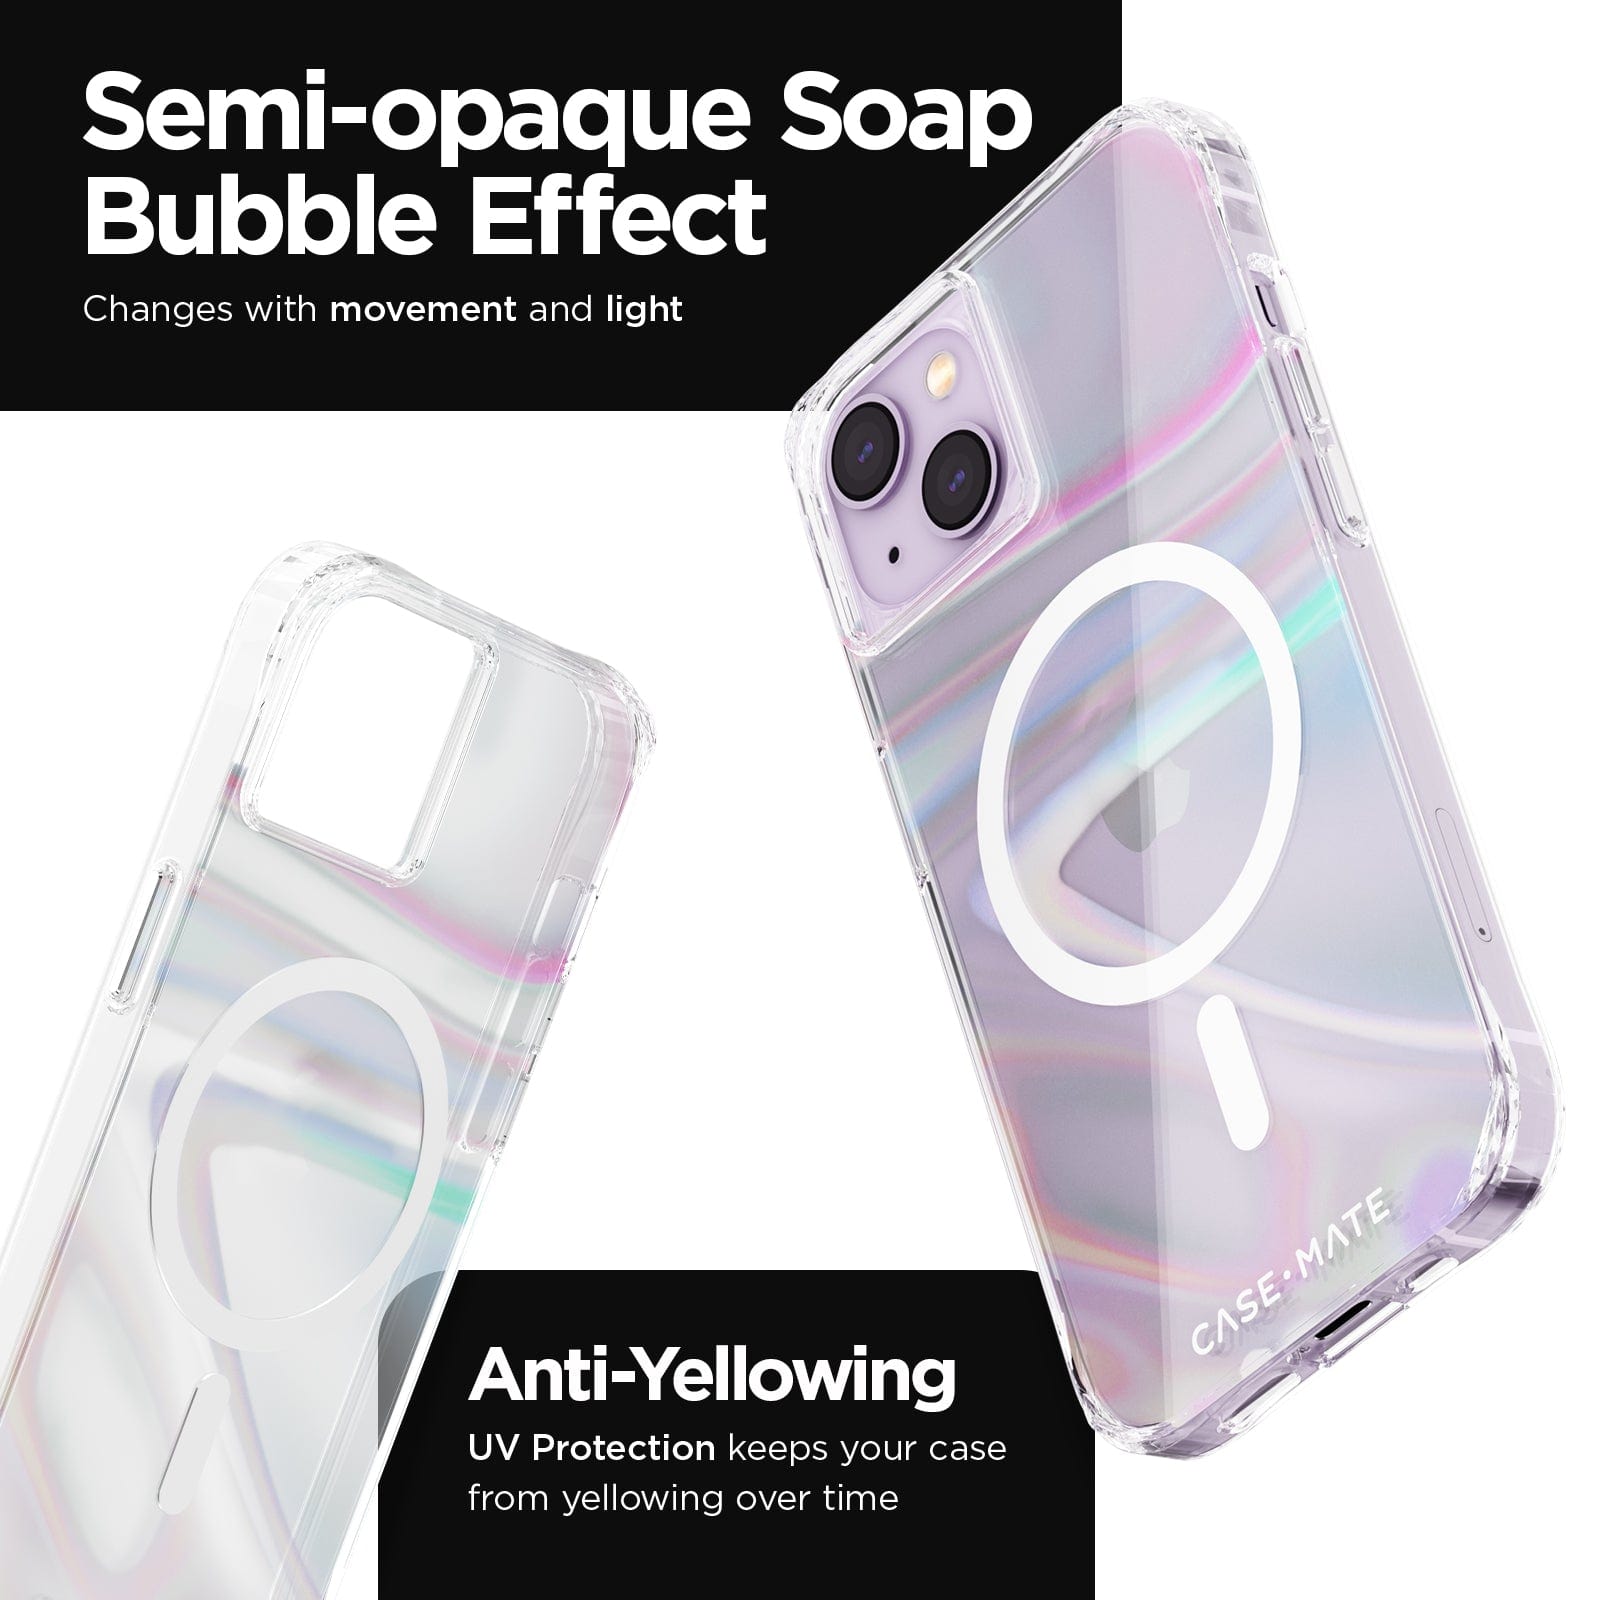 SEMI-OPAQUE SOAP BUBBLE EFFECT. CHANGES WITH MOVEMENT AND LIGHT. ANTI-YELLOWING UV PROTECTION KEEPS YOUR CASE FROM YELLOWING OVER TIME. 